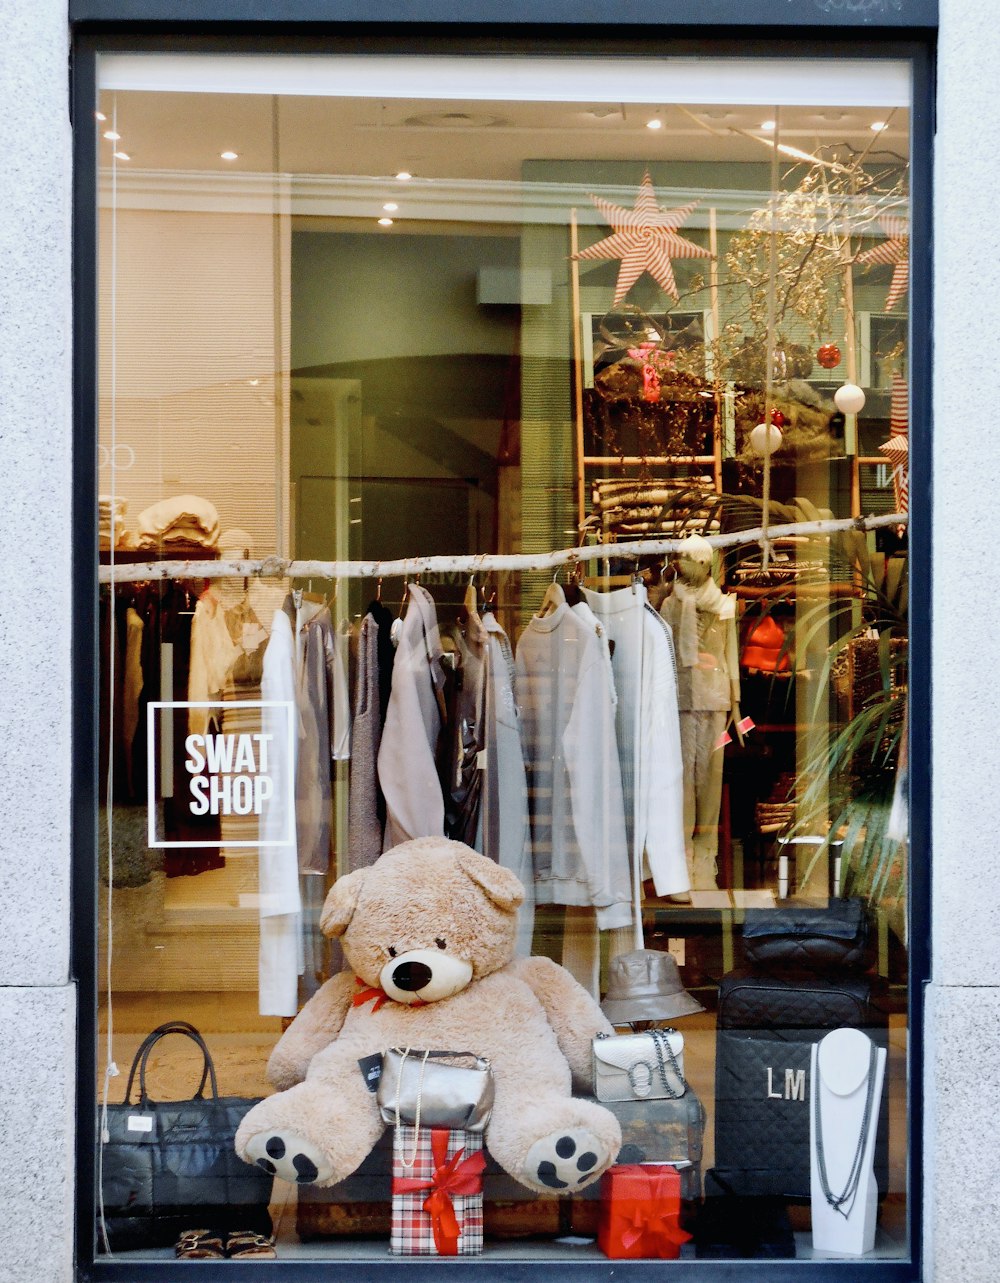 a teddy bear sitting in a window of a clothing store